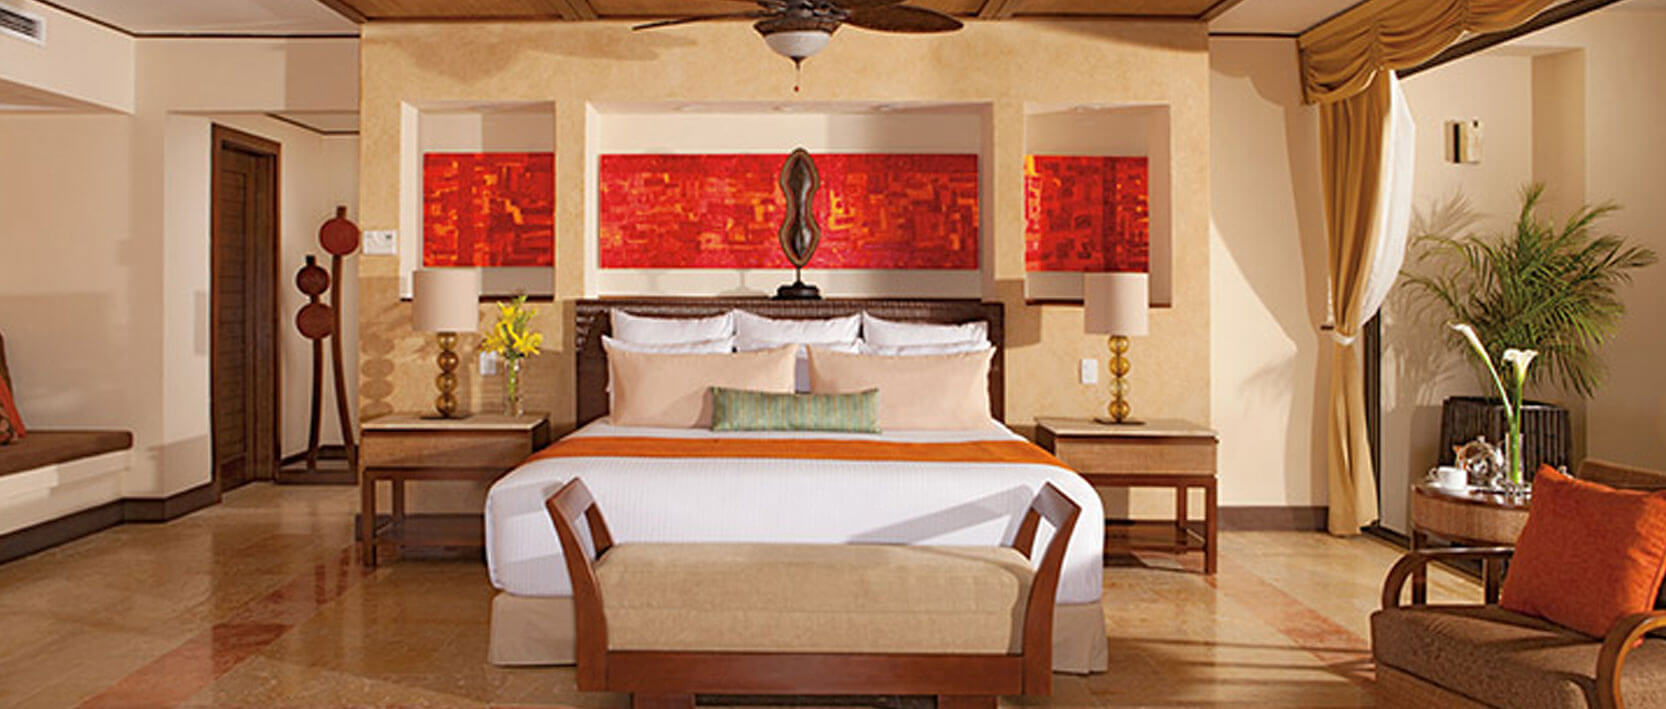 Dreams Riviera Cancun Resort Accommodations - Preferred Club Ocean Front Presidential Suite